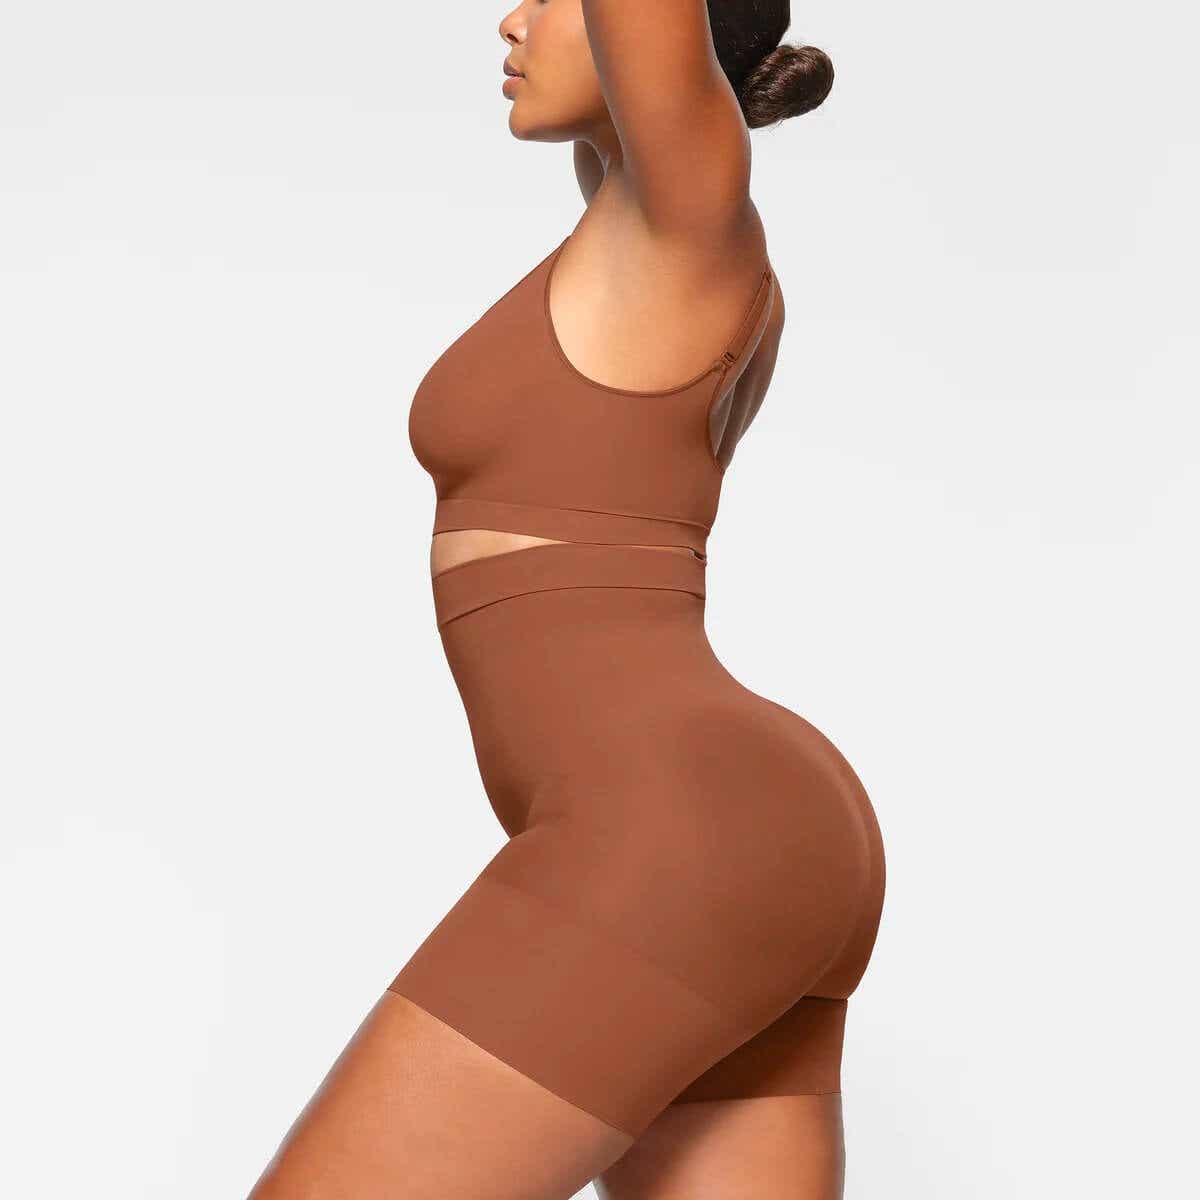 SKIMS - Bold new colors in the contouring bodysuits you can't get